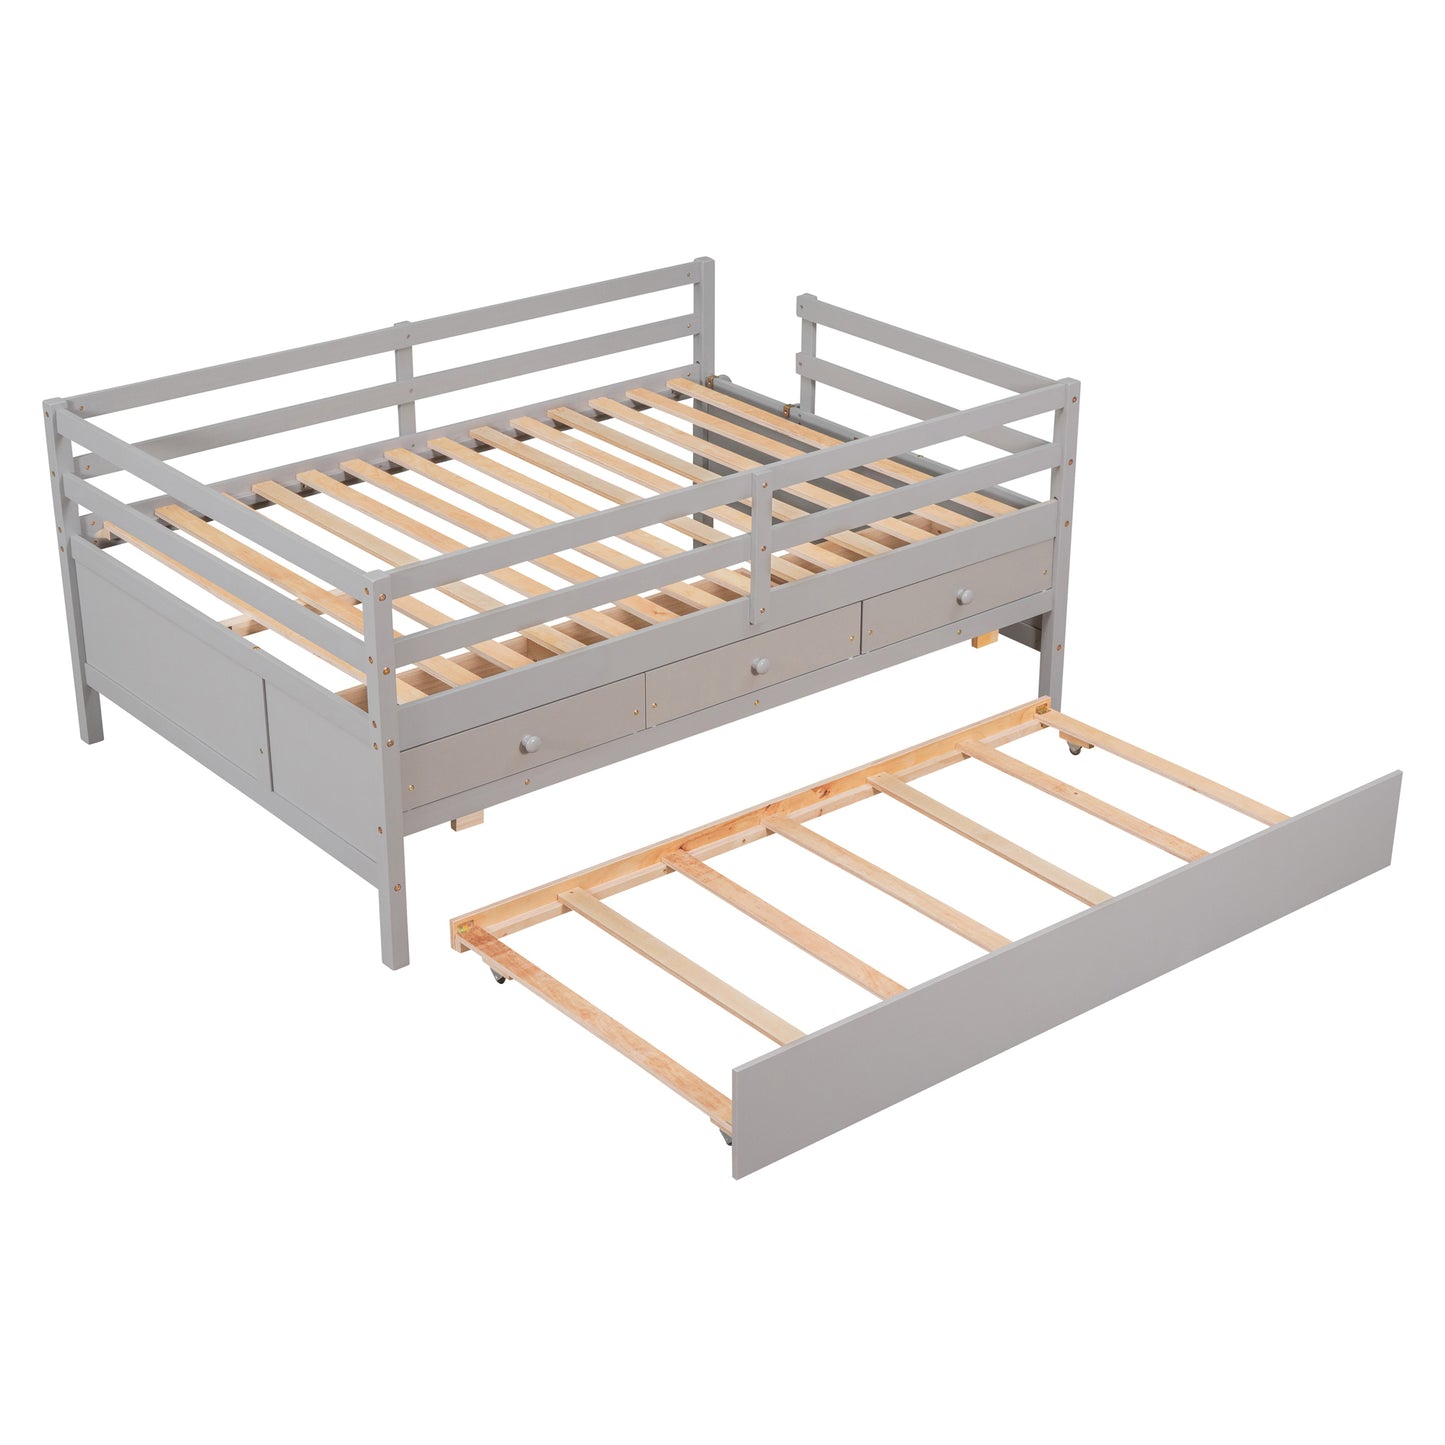 Low Loft Bed Full Size with Full Safety Fence, Climbing ladder, Storage Drawers and Trundle Gray Solid Wood Bed